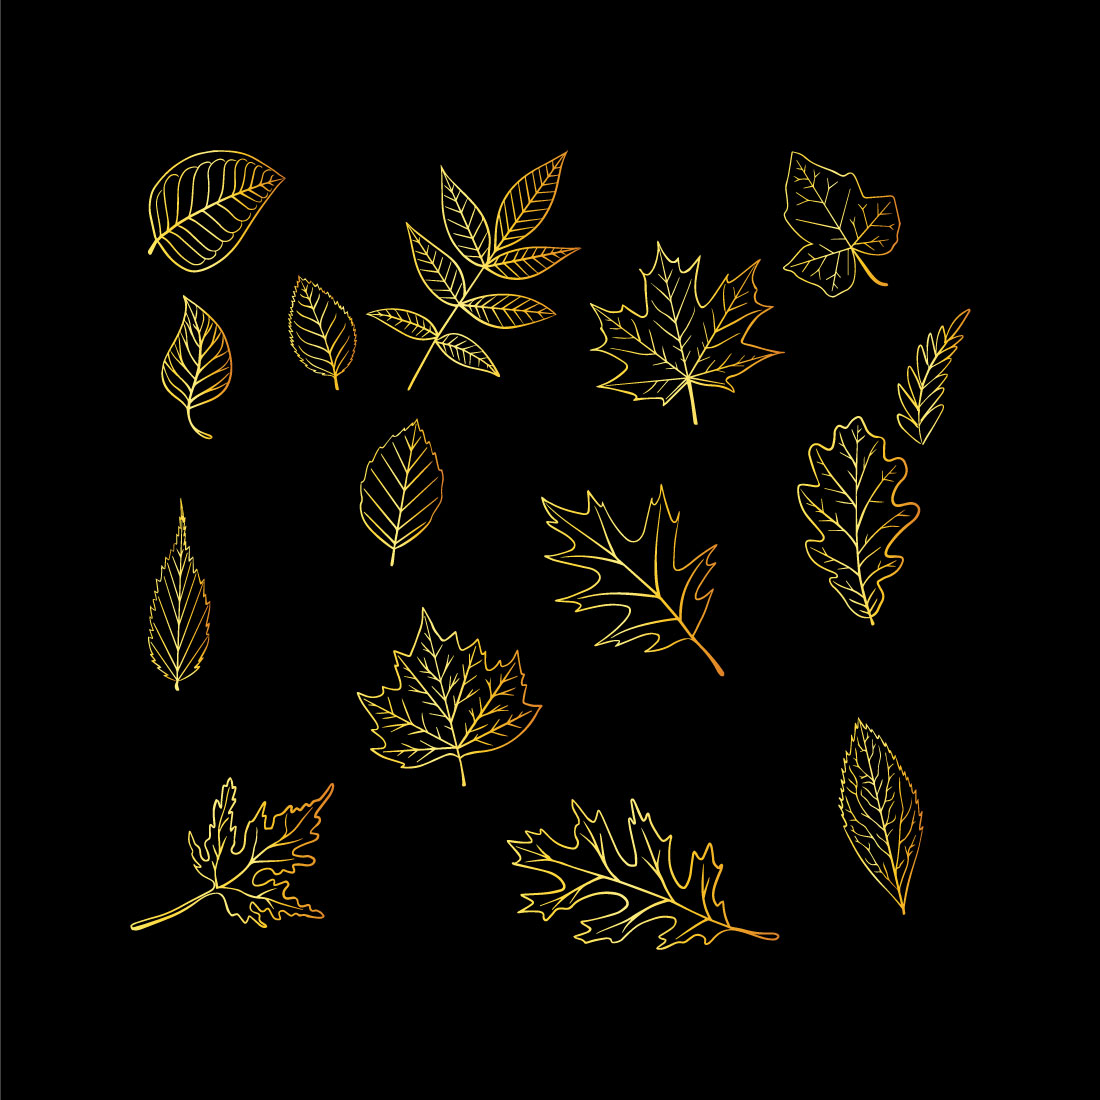 Black background with gold leaves.